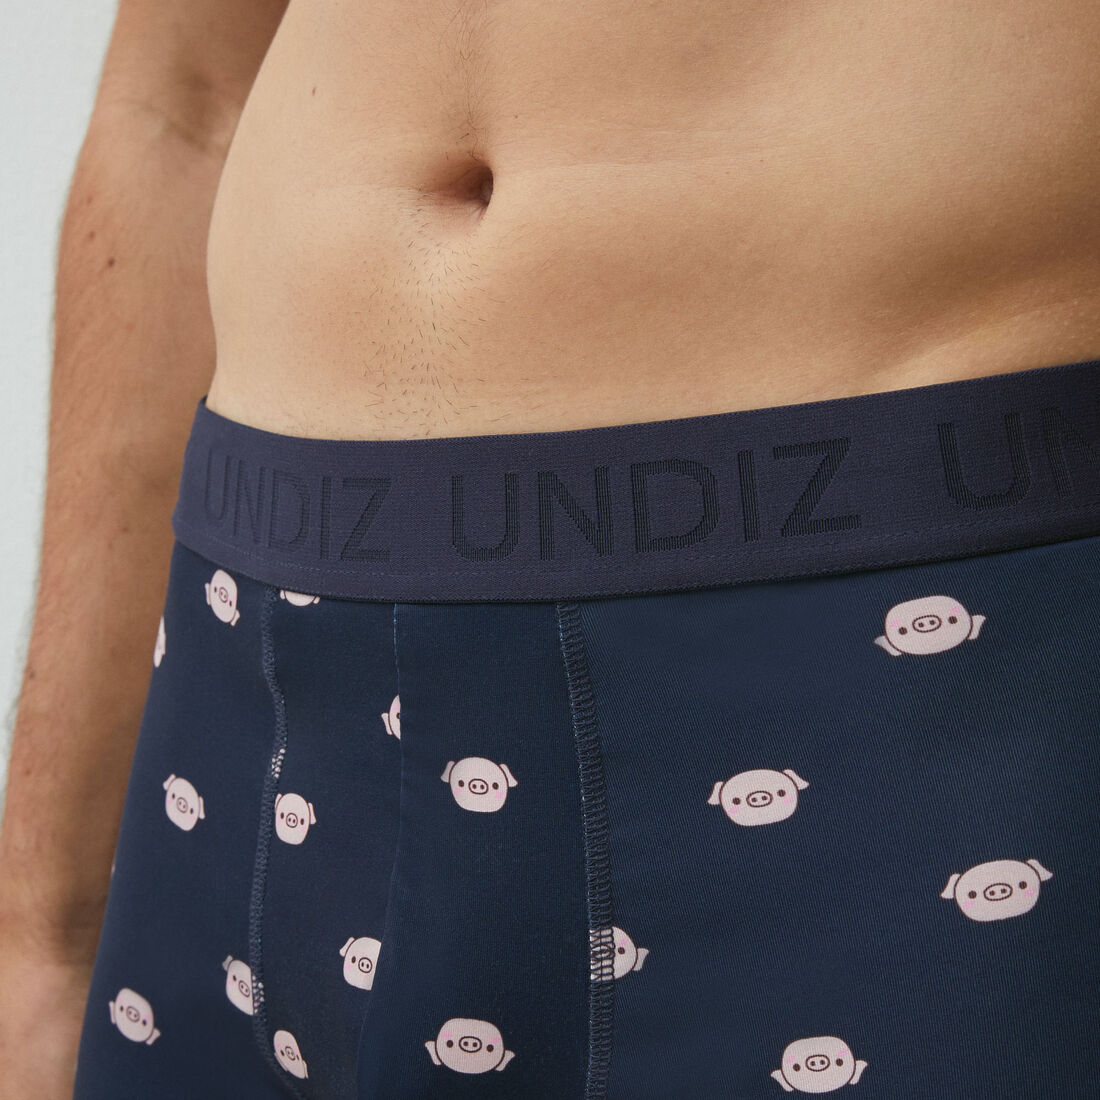 cotton boxer shorts with pig pattern;